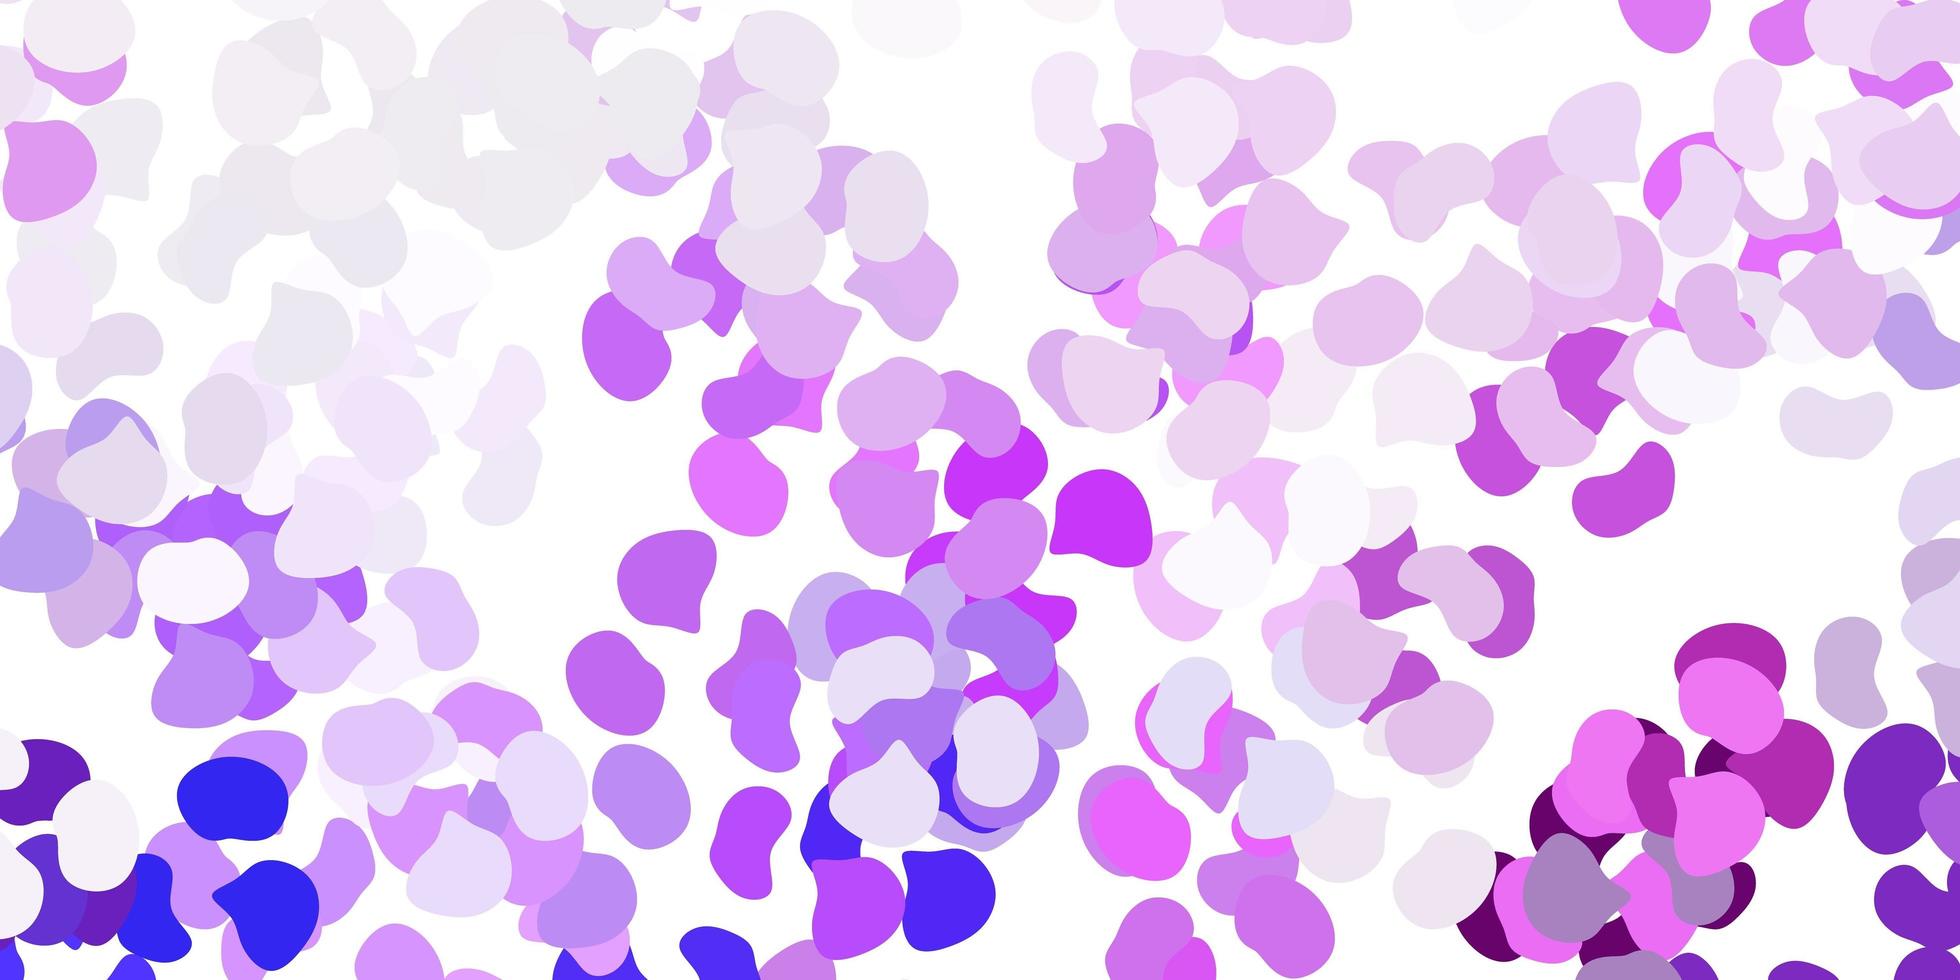 Light purple vector pattern with abstract shapes